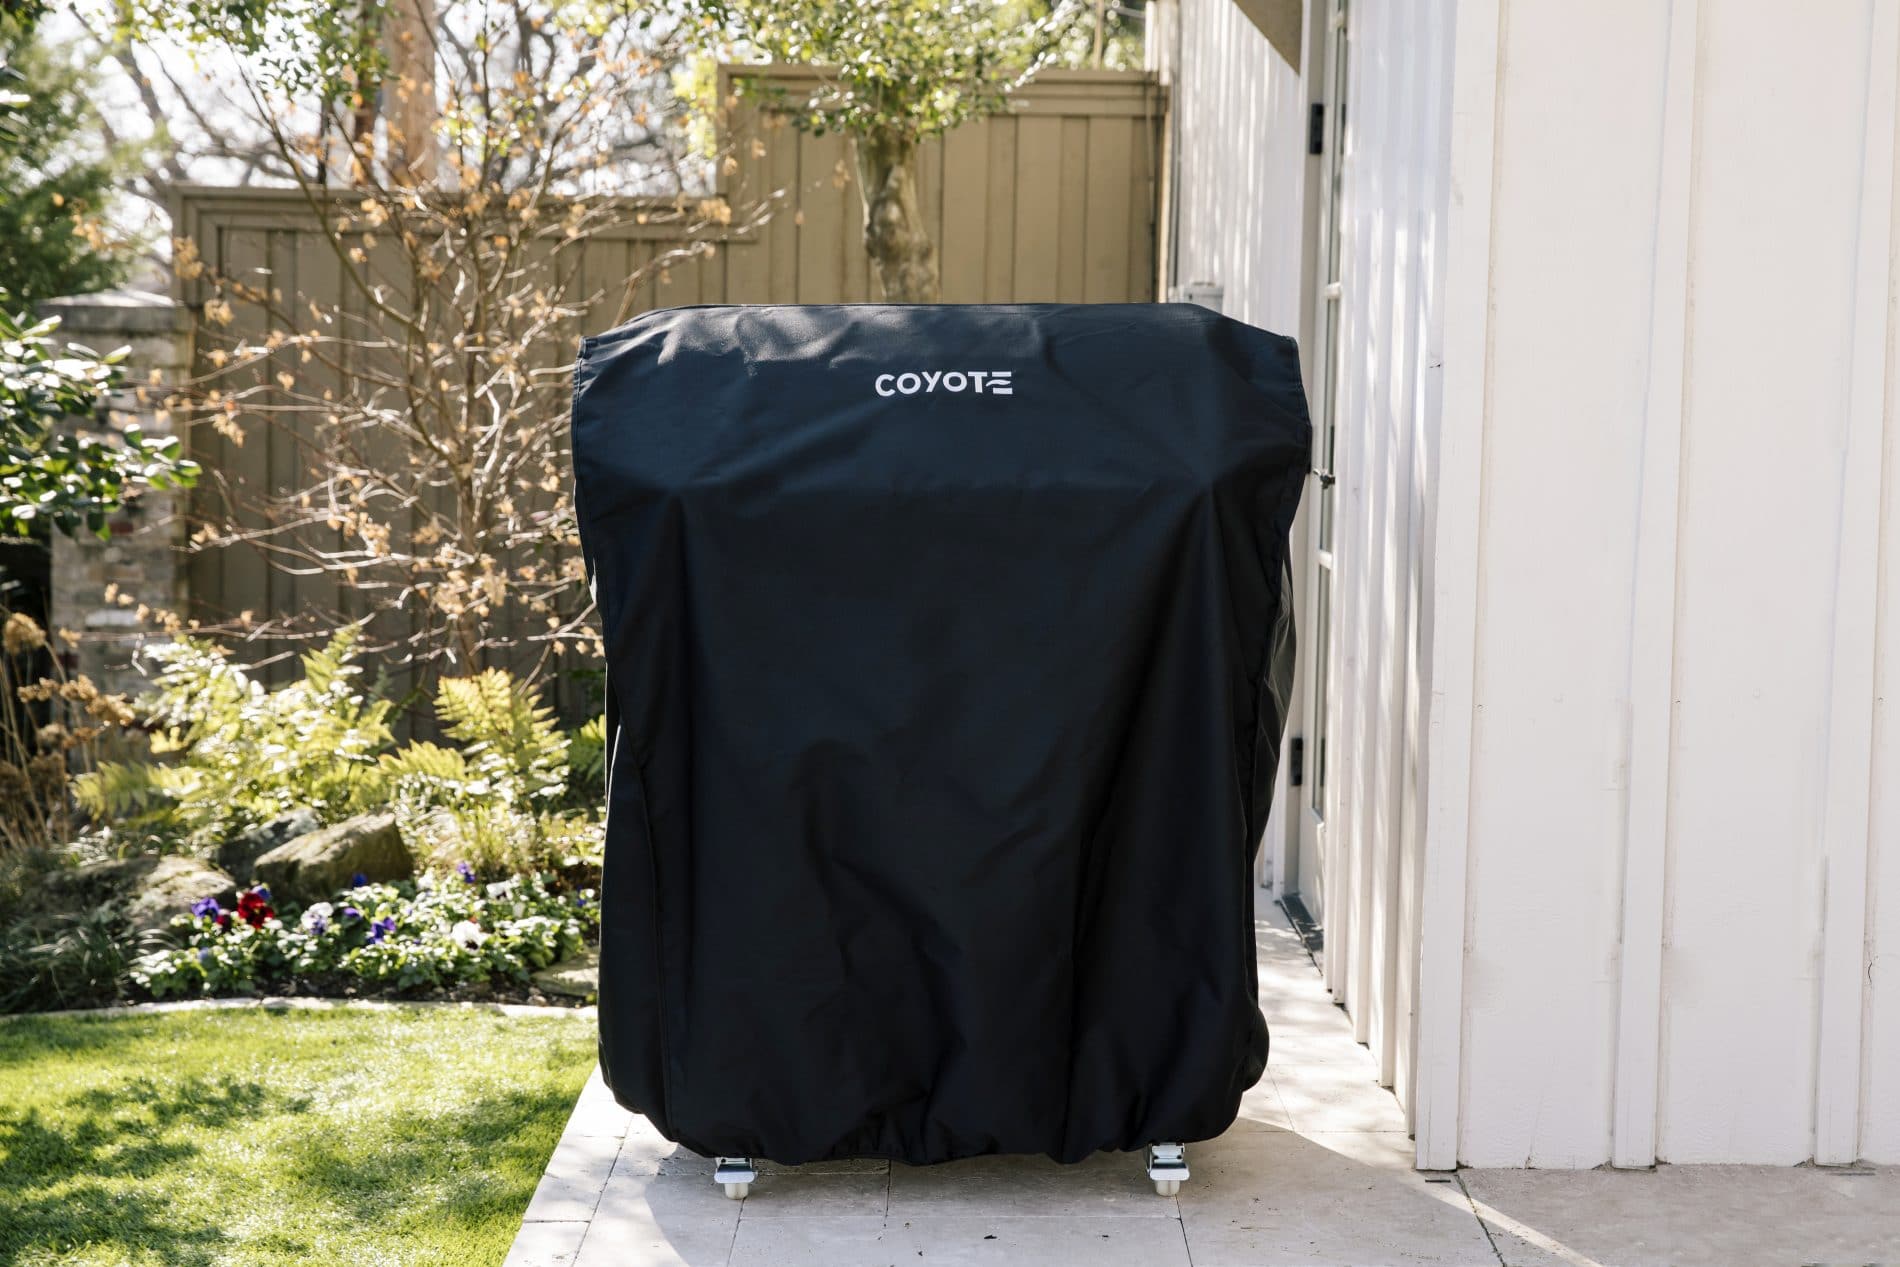 Coyote Grill Cover (Grill plus Cart) for 28"W Grills Cart and Grill Cover